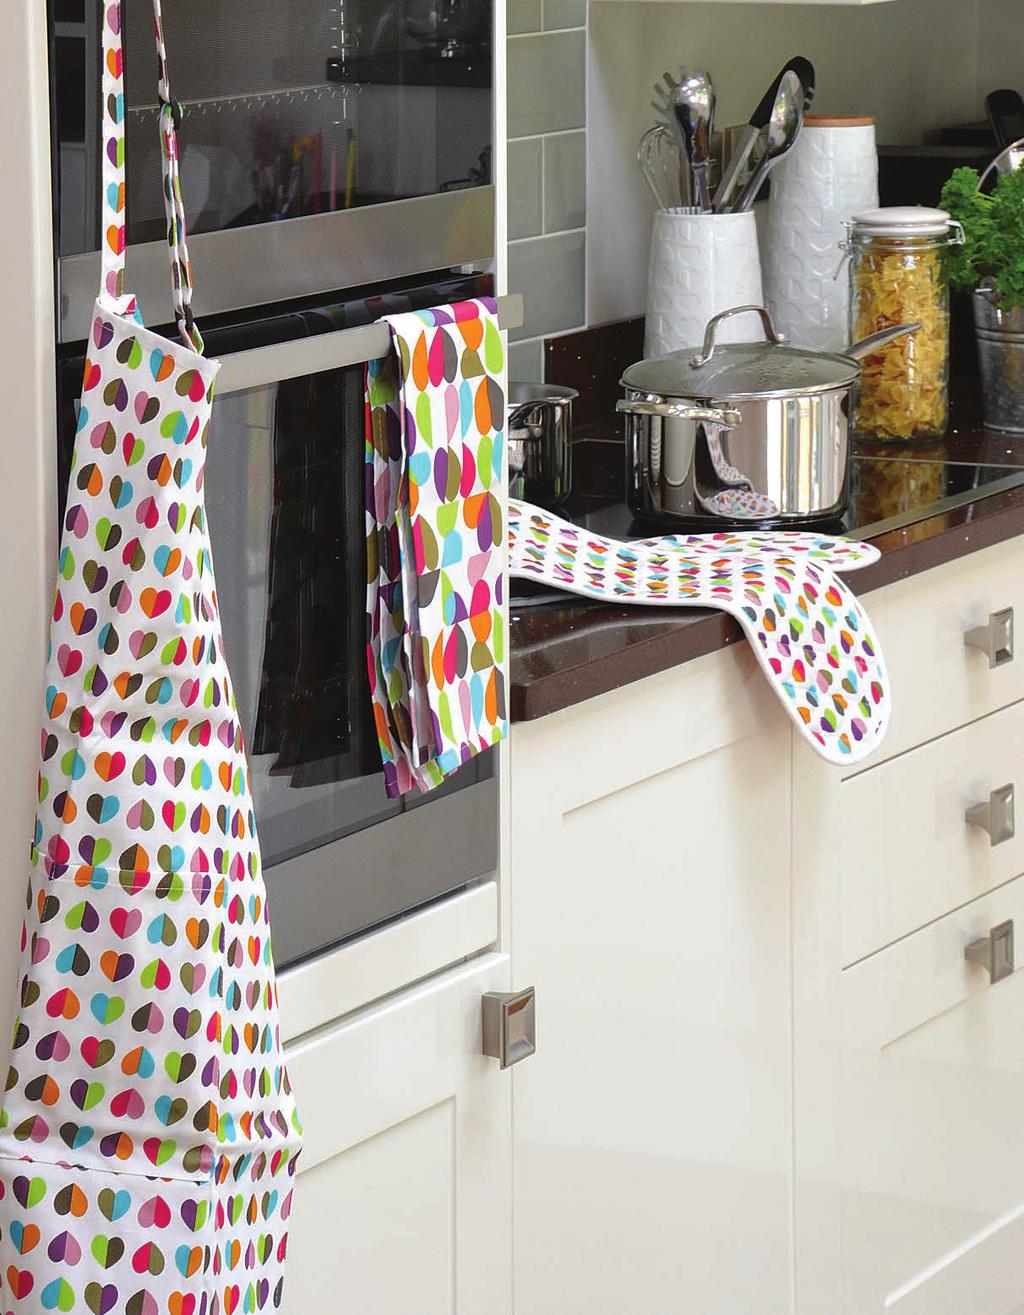 Confetti Brokenhearted & Blooming Lovely Textiles and tins Delightful prints to cheer any kitchen!